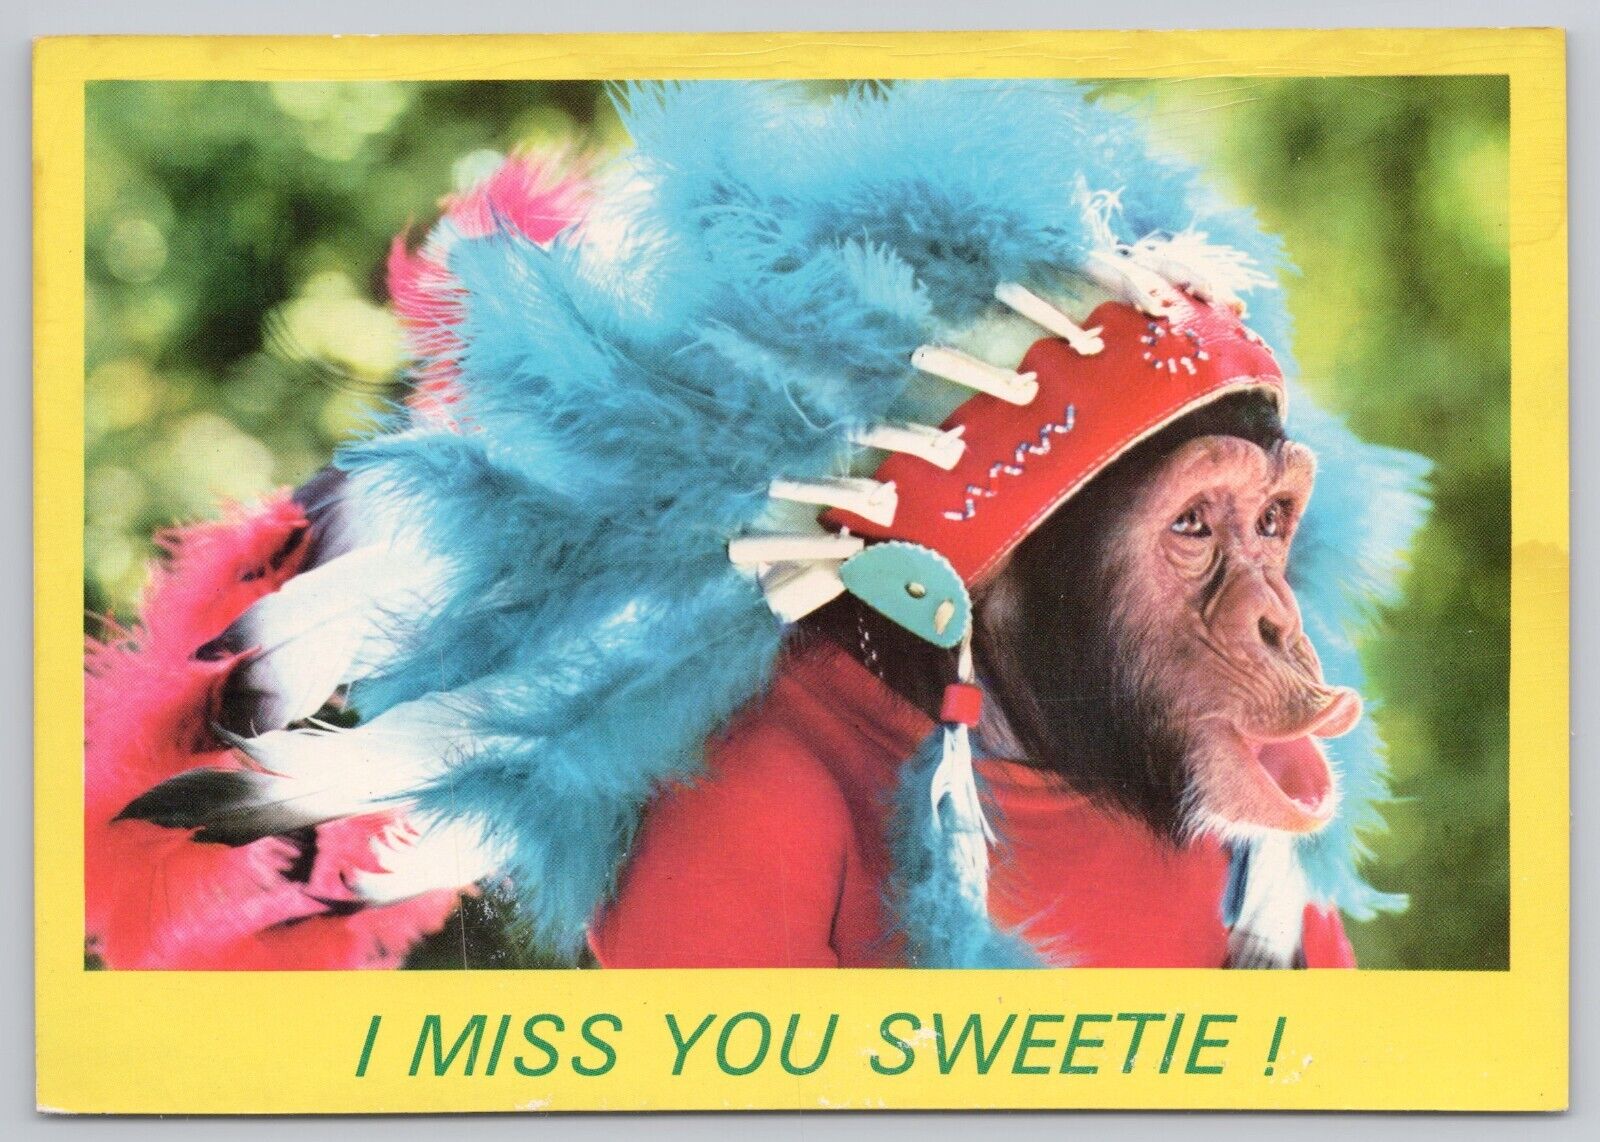 Greetings from Florida, Cute Monkey Wearing Indian Feathers, Vintage Postcard